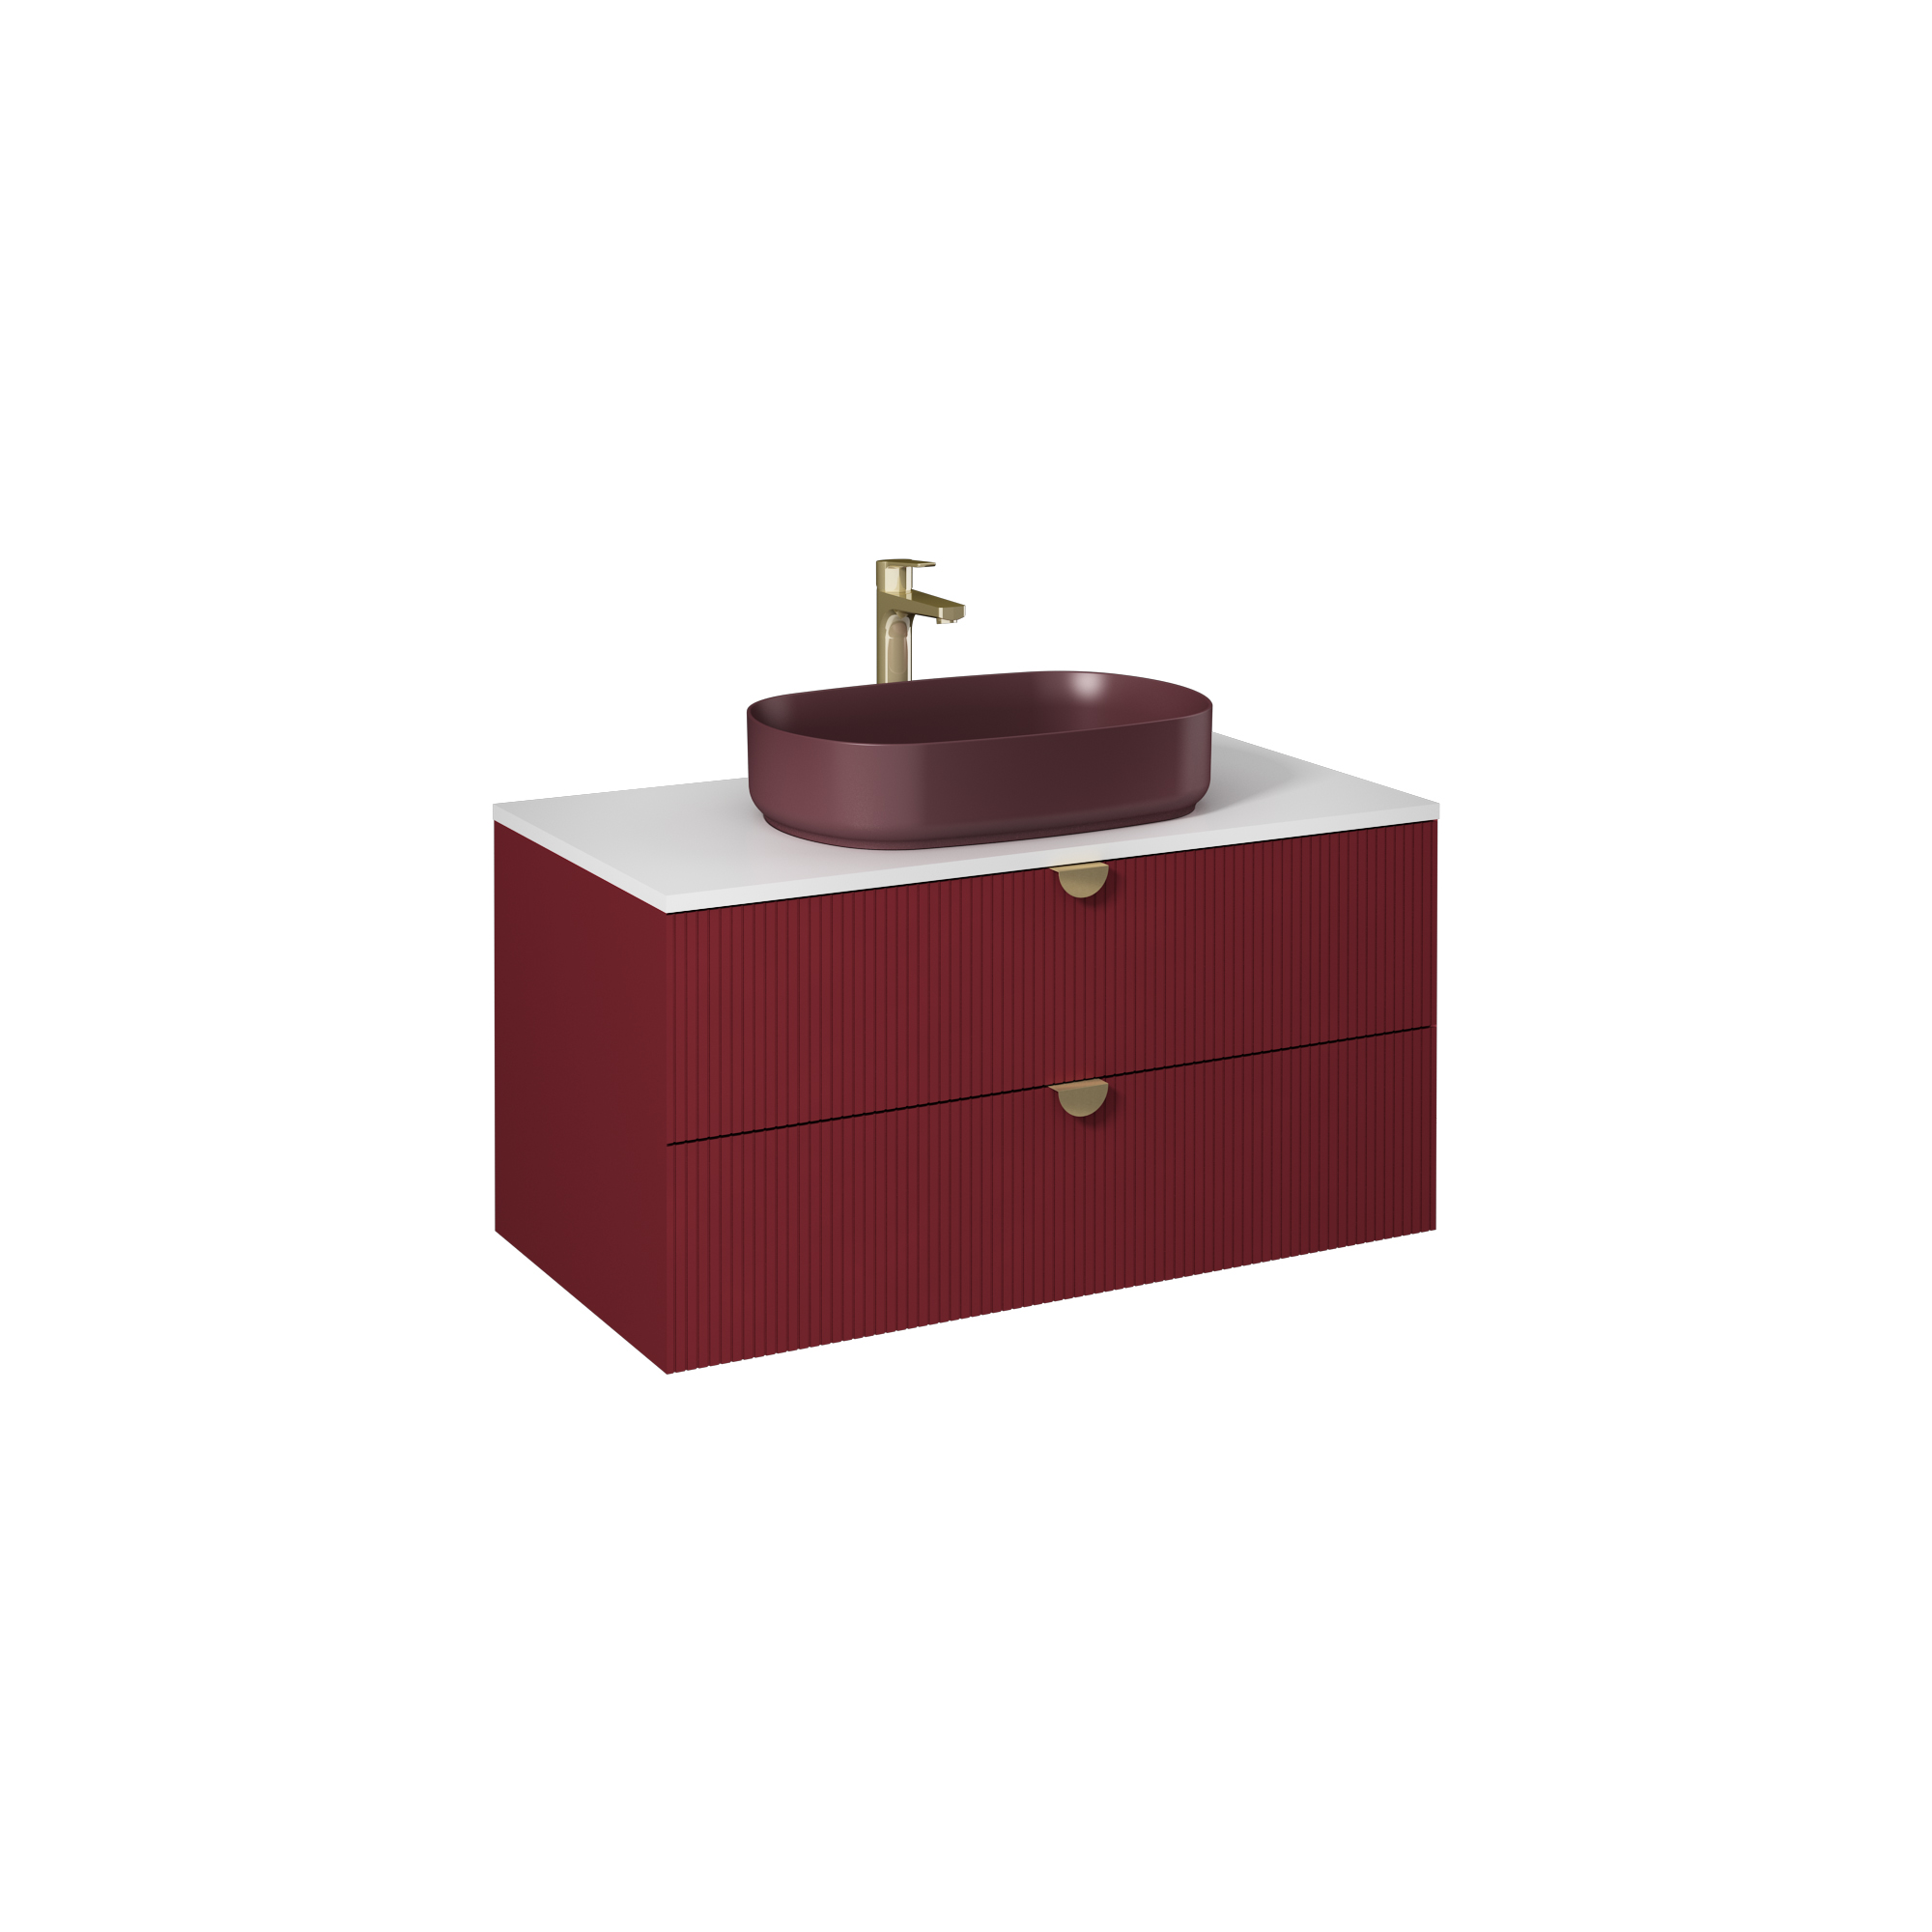 Infinity Washbasin Cabinet Ruby Red, with Rustic Maroon Washbasin 39"